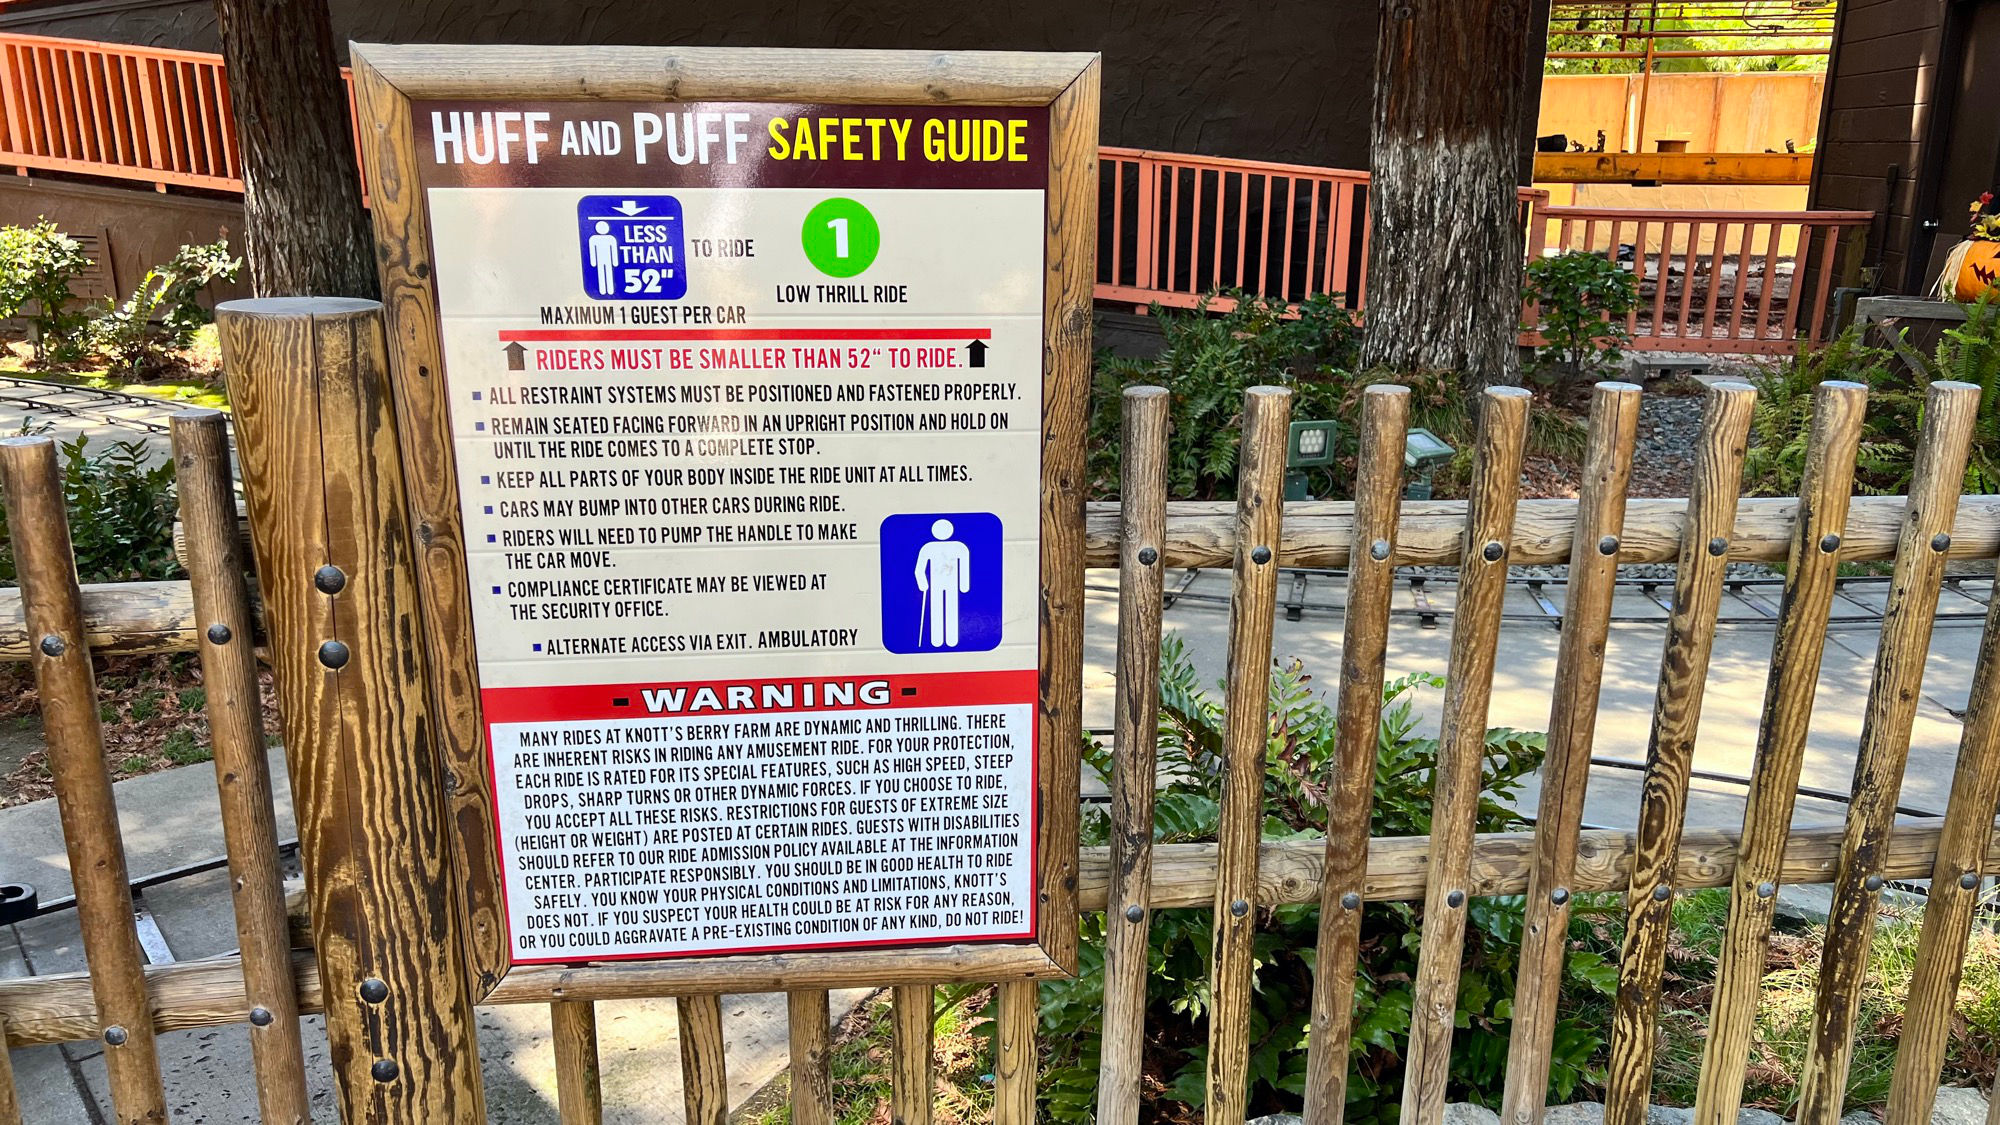 Huff and Puff Safety Guide